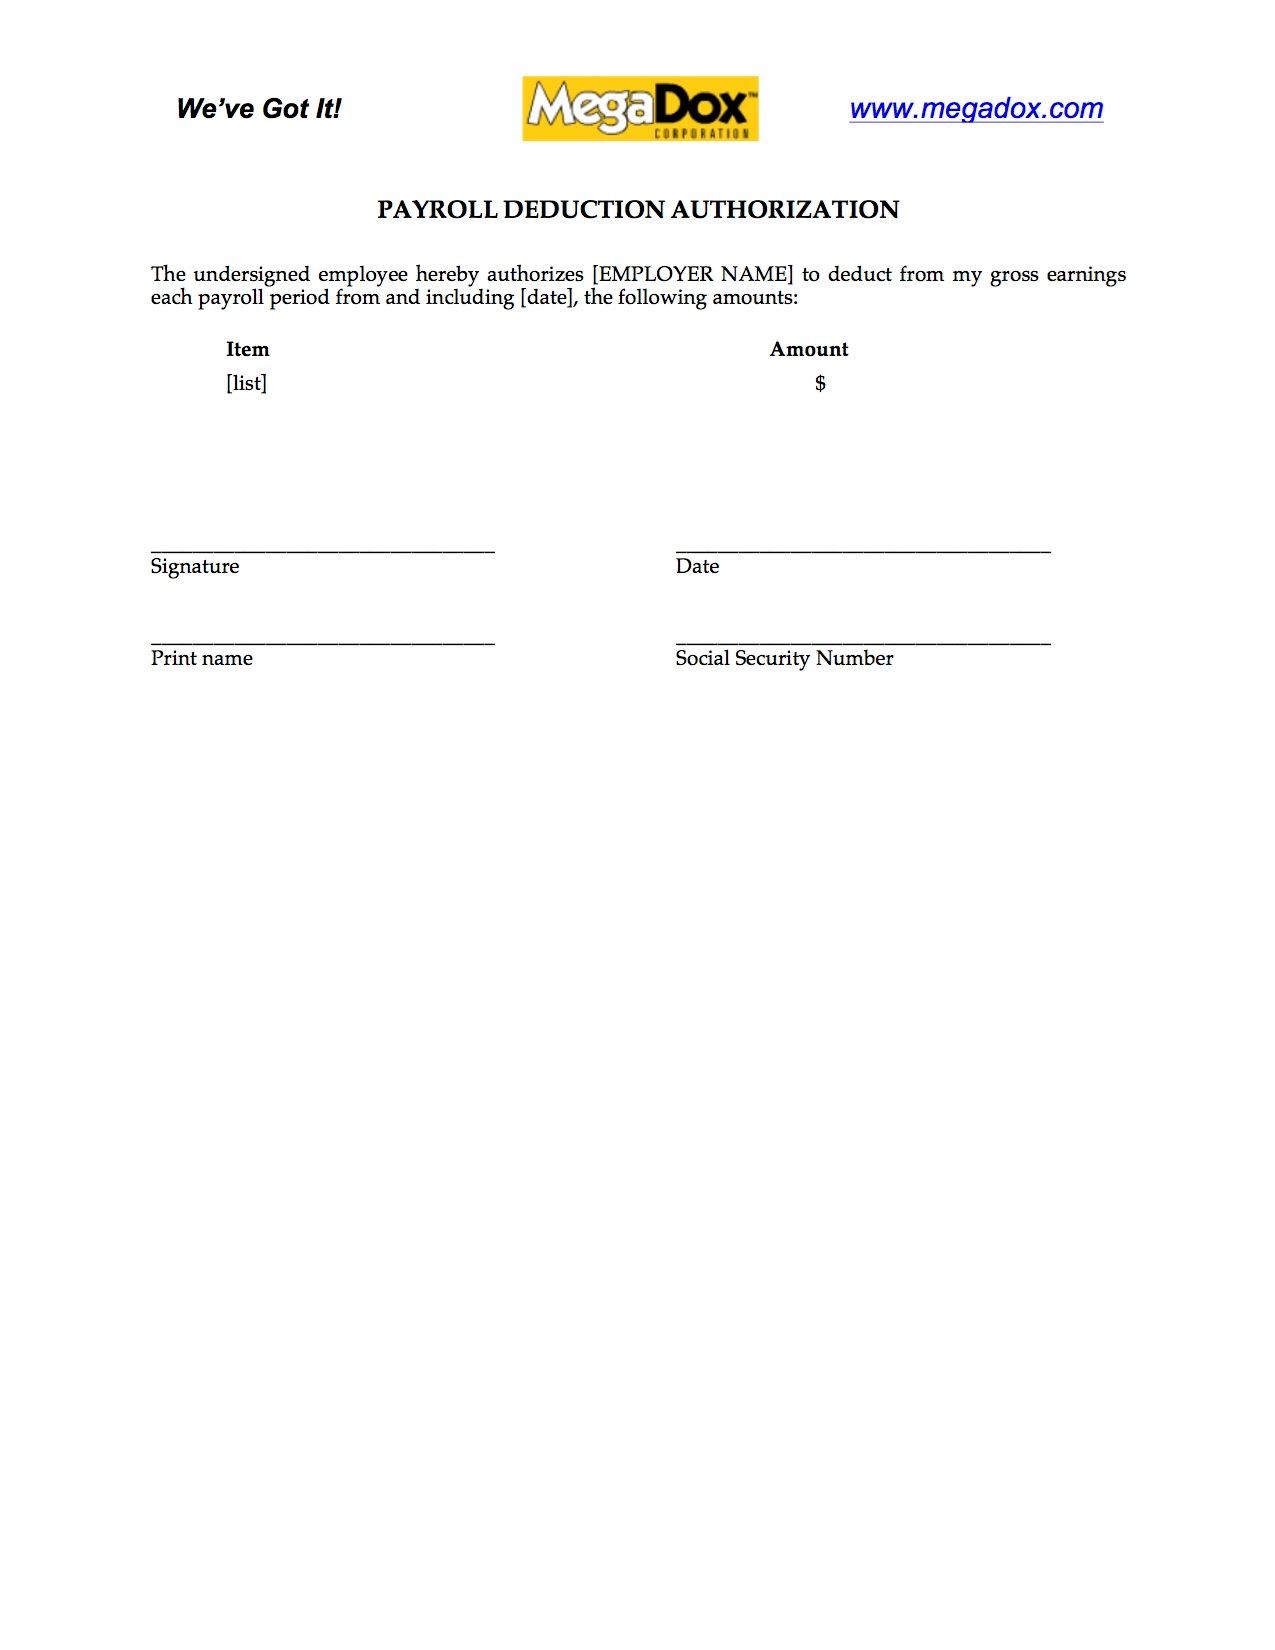 Payroll Deduction Authorization Form Template from www.megadox.com